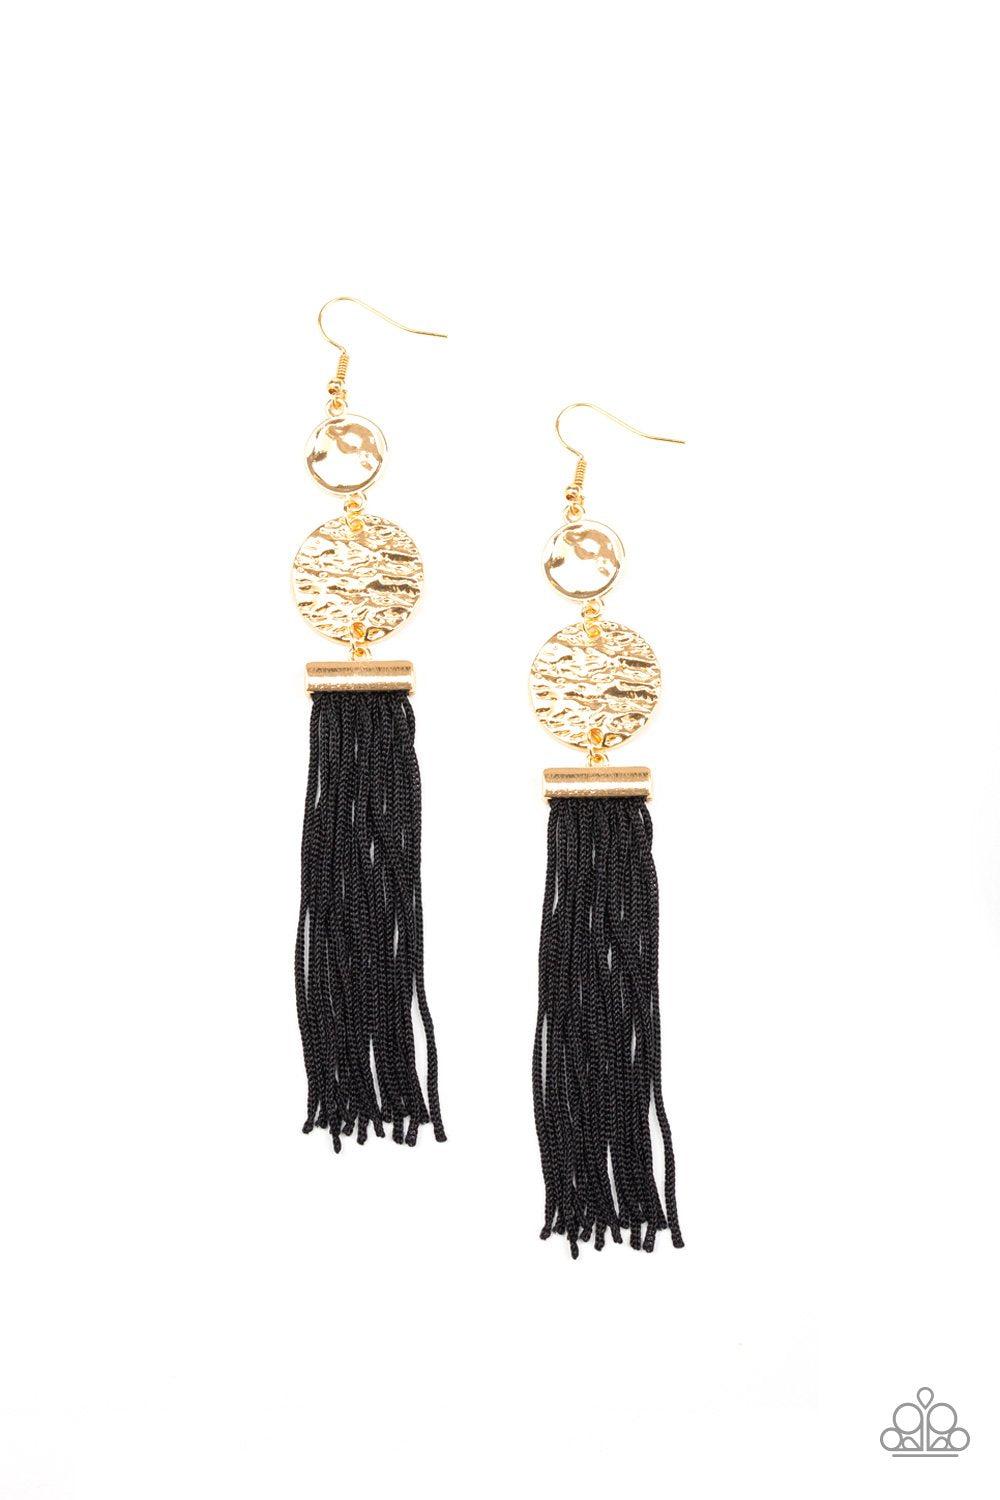 Lotus Gardens Gold and Black Fringe Earrings - Paparazzi Accessories-CarasShop.com - $5 Jewelry by Cara Jewels